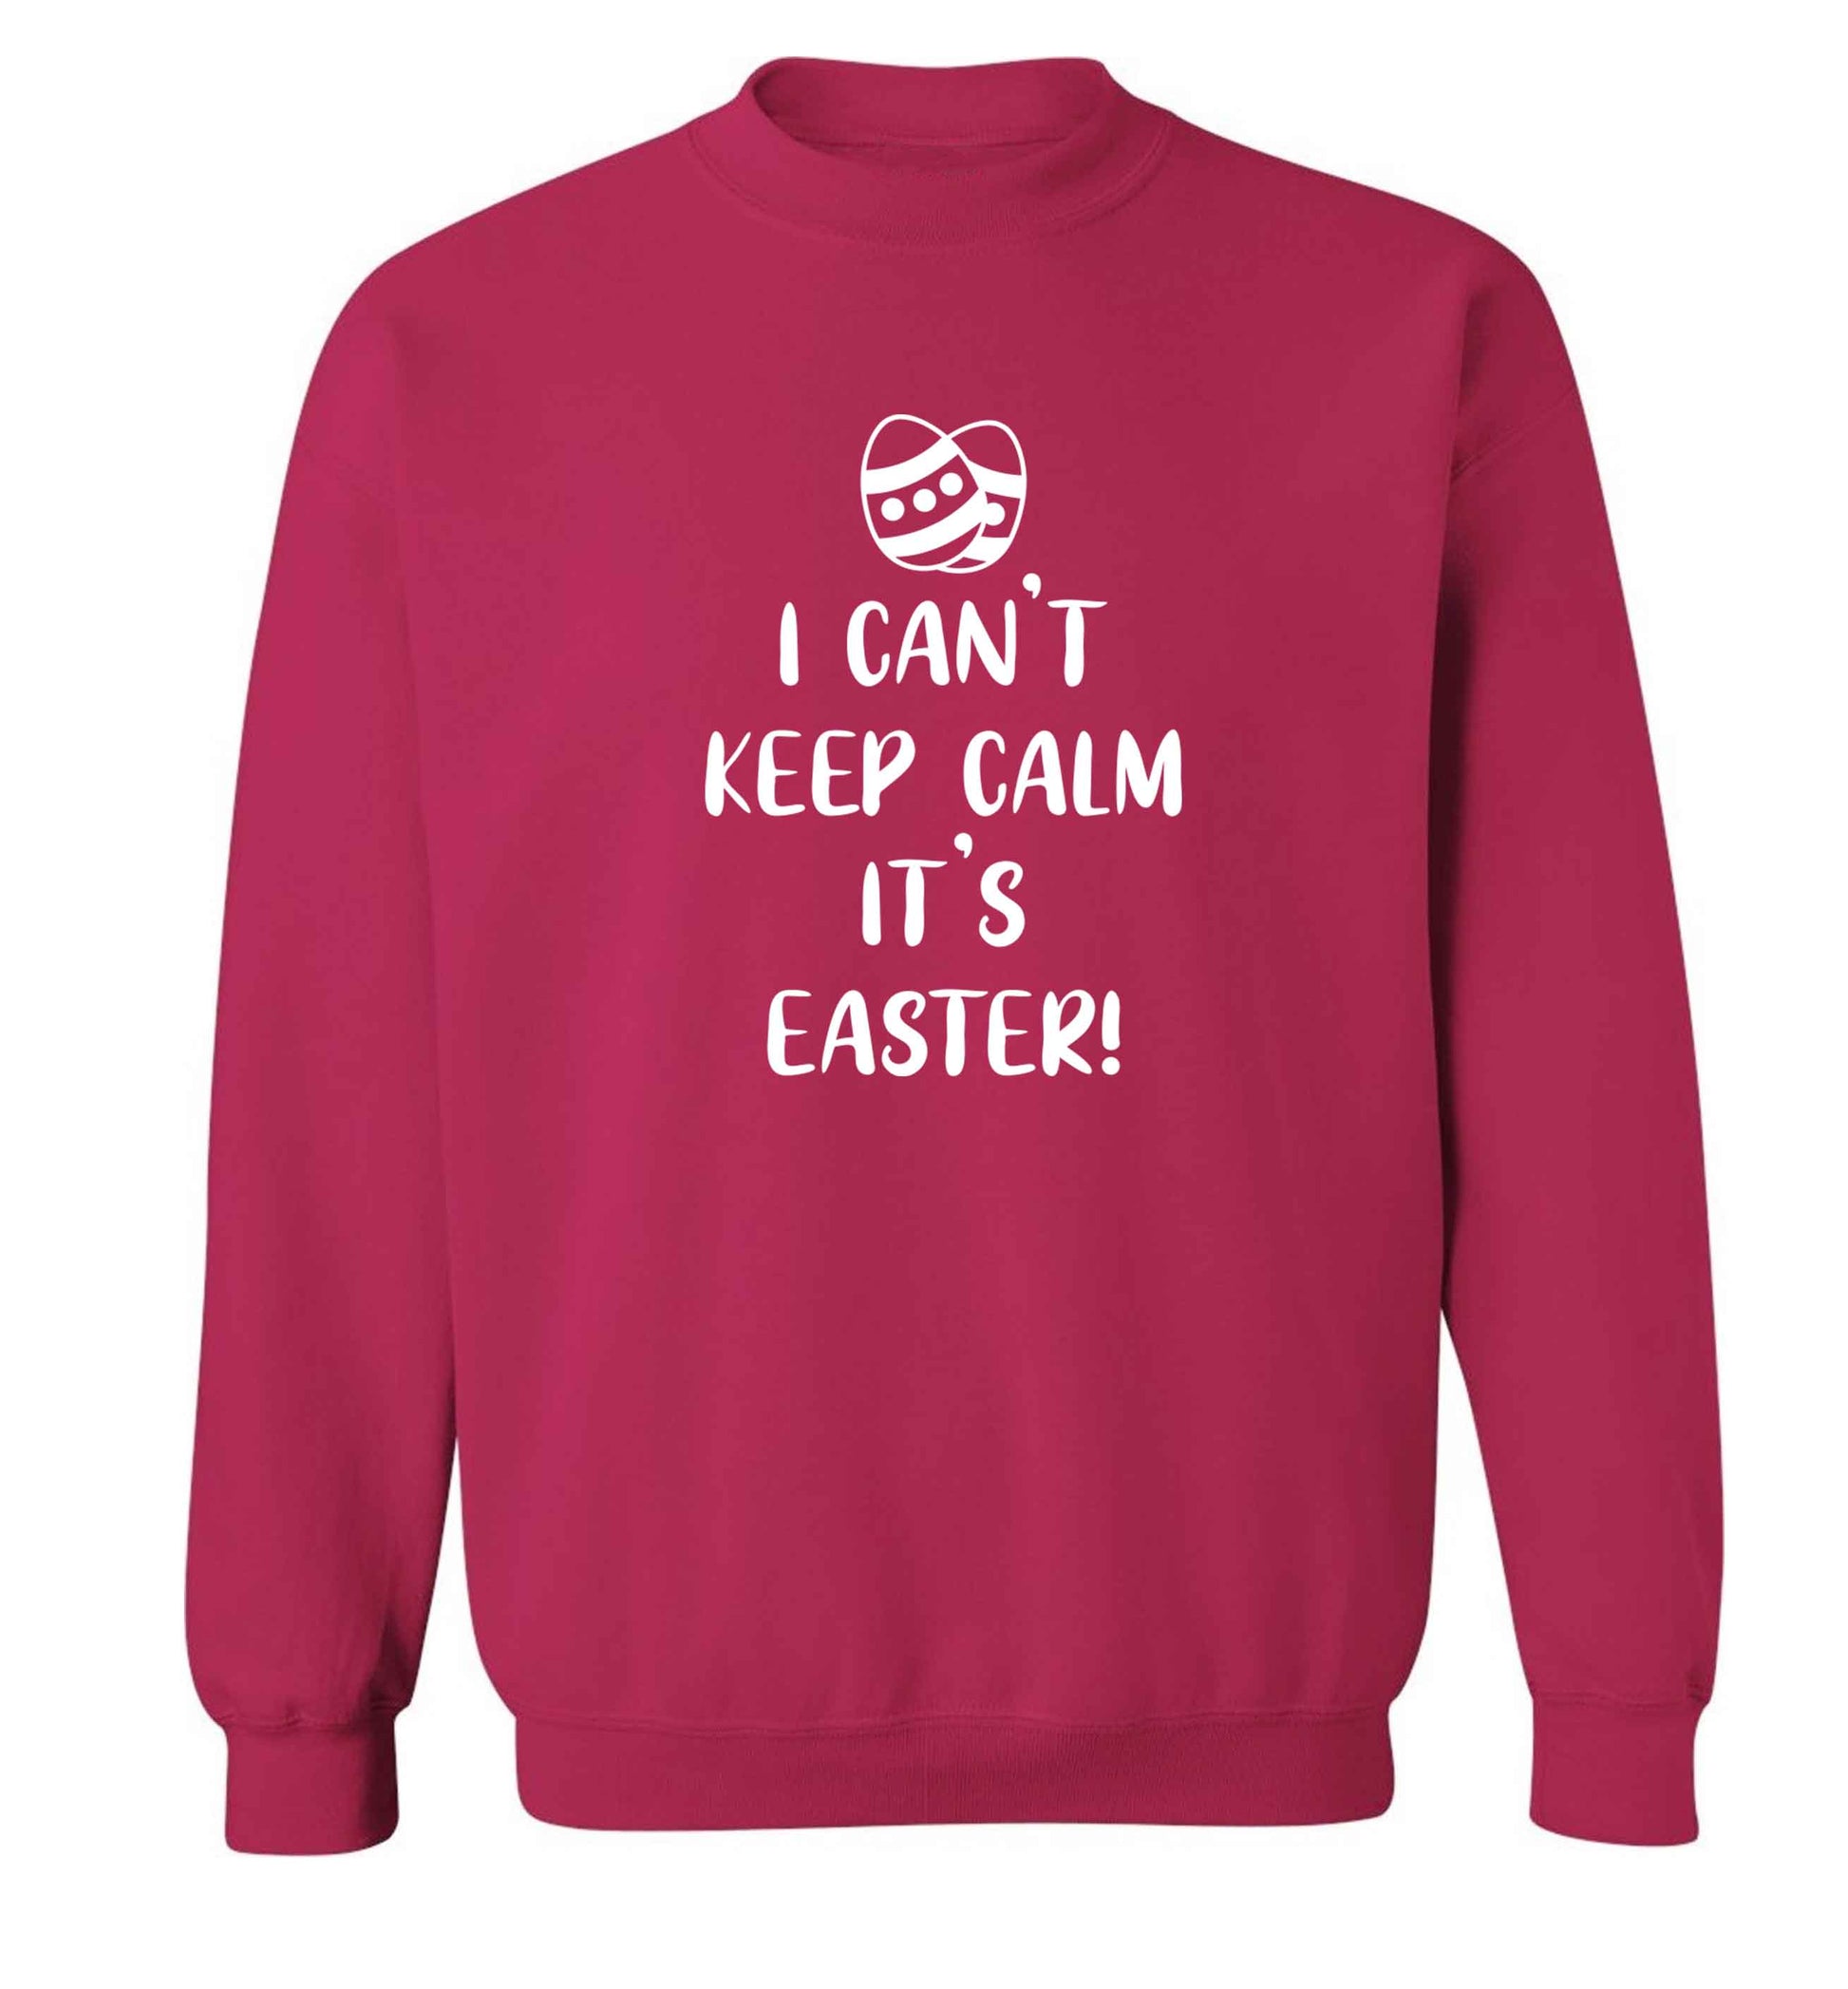 I can't keep calm it's Easter adult's unisex pink sweater 2XL